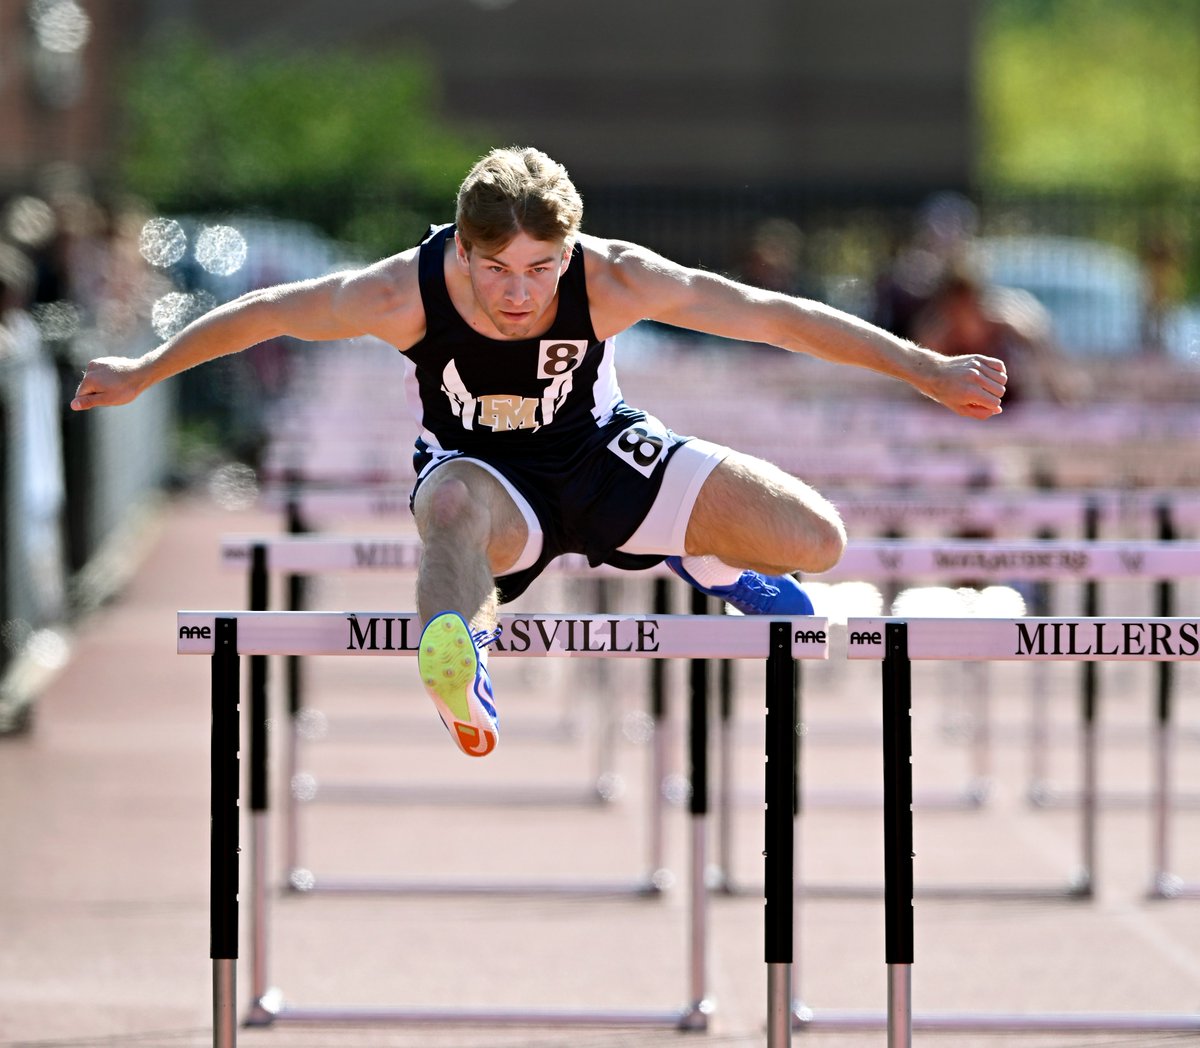 Action from the 16th Cy Fritz Track & Field Open at Millersville University @LancasterSports @LancasterOnline @JasonGuarente @BaronSports717 @pmcometssports @SolancoTrack 📷 Gallery lanc.news/4b5apCI